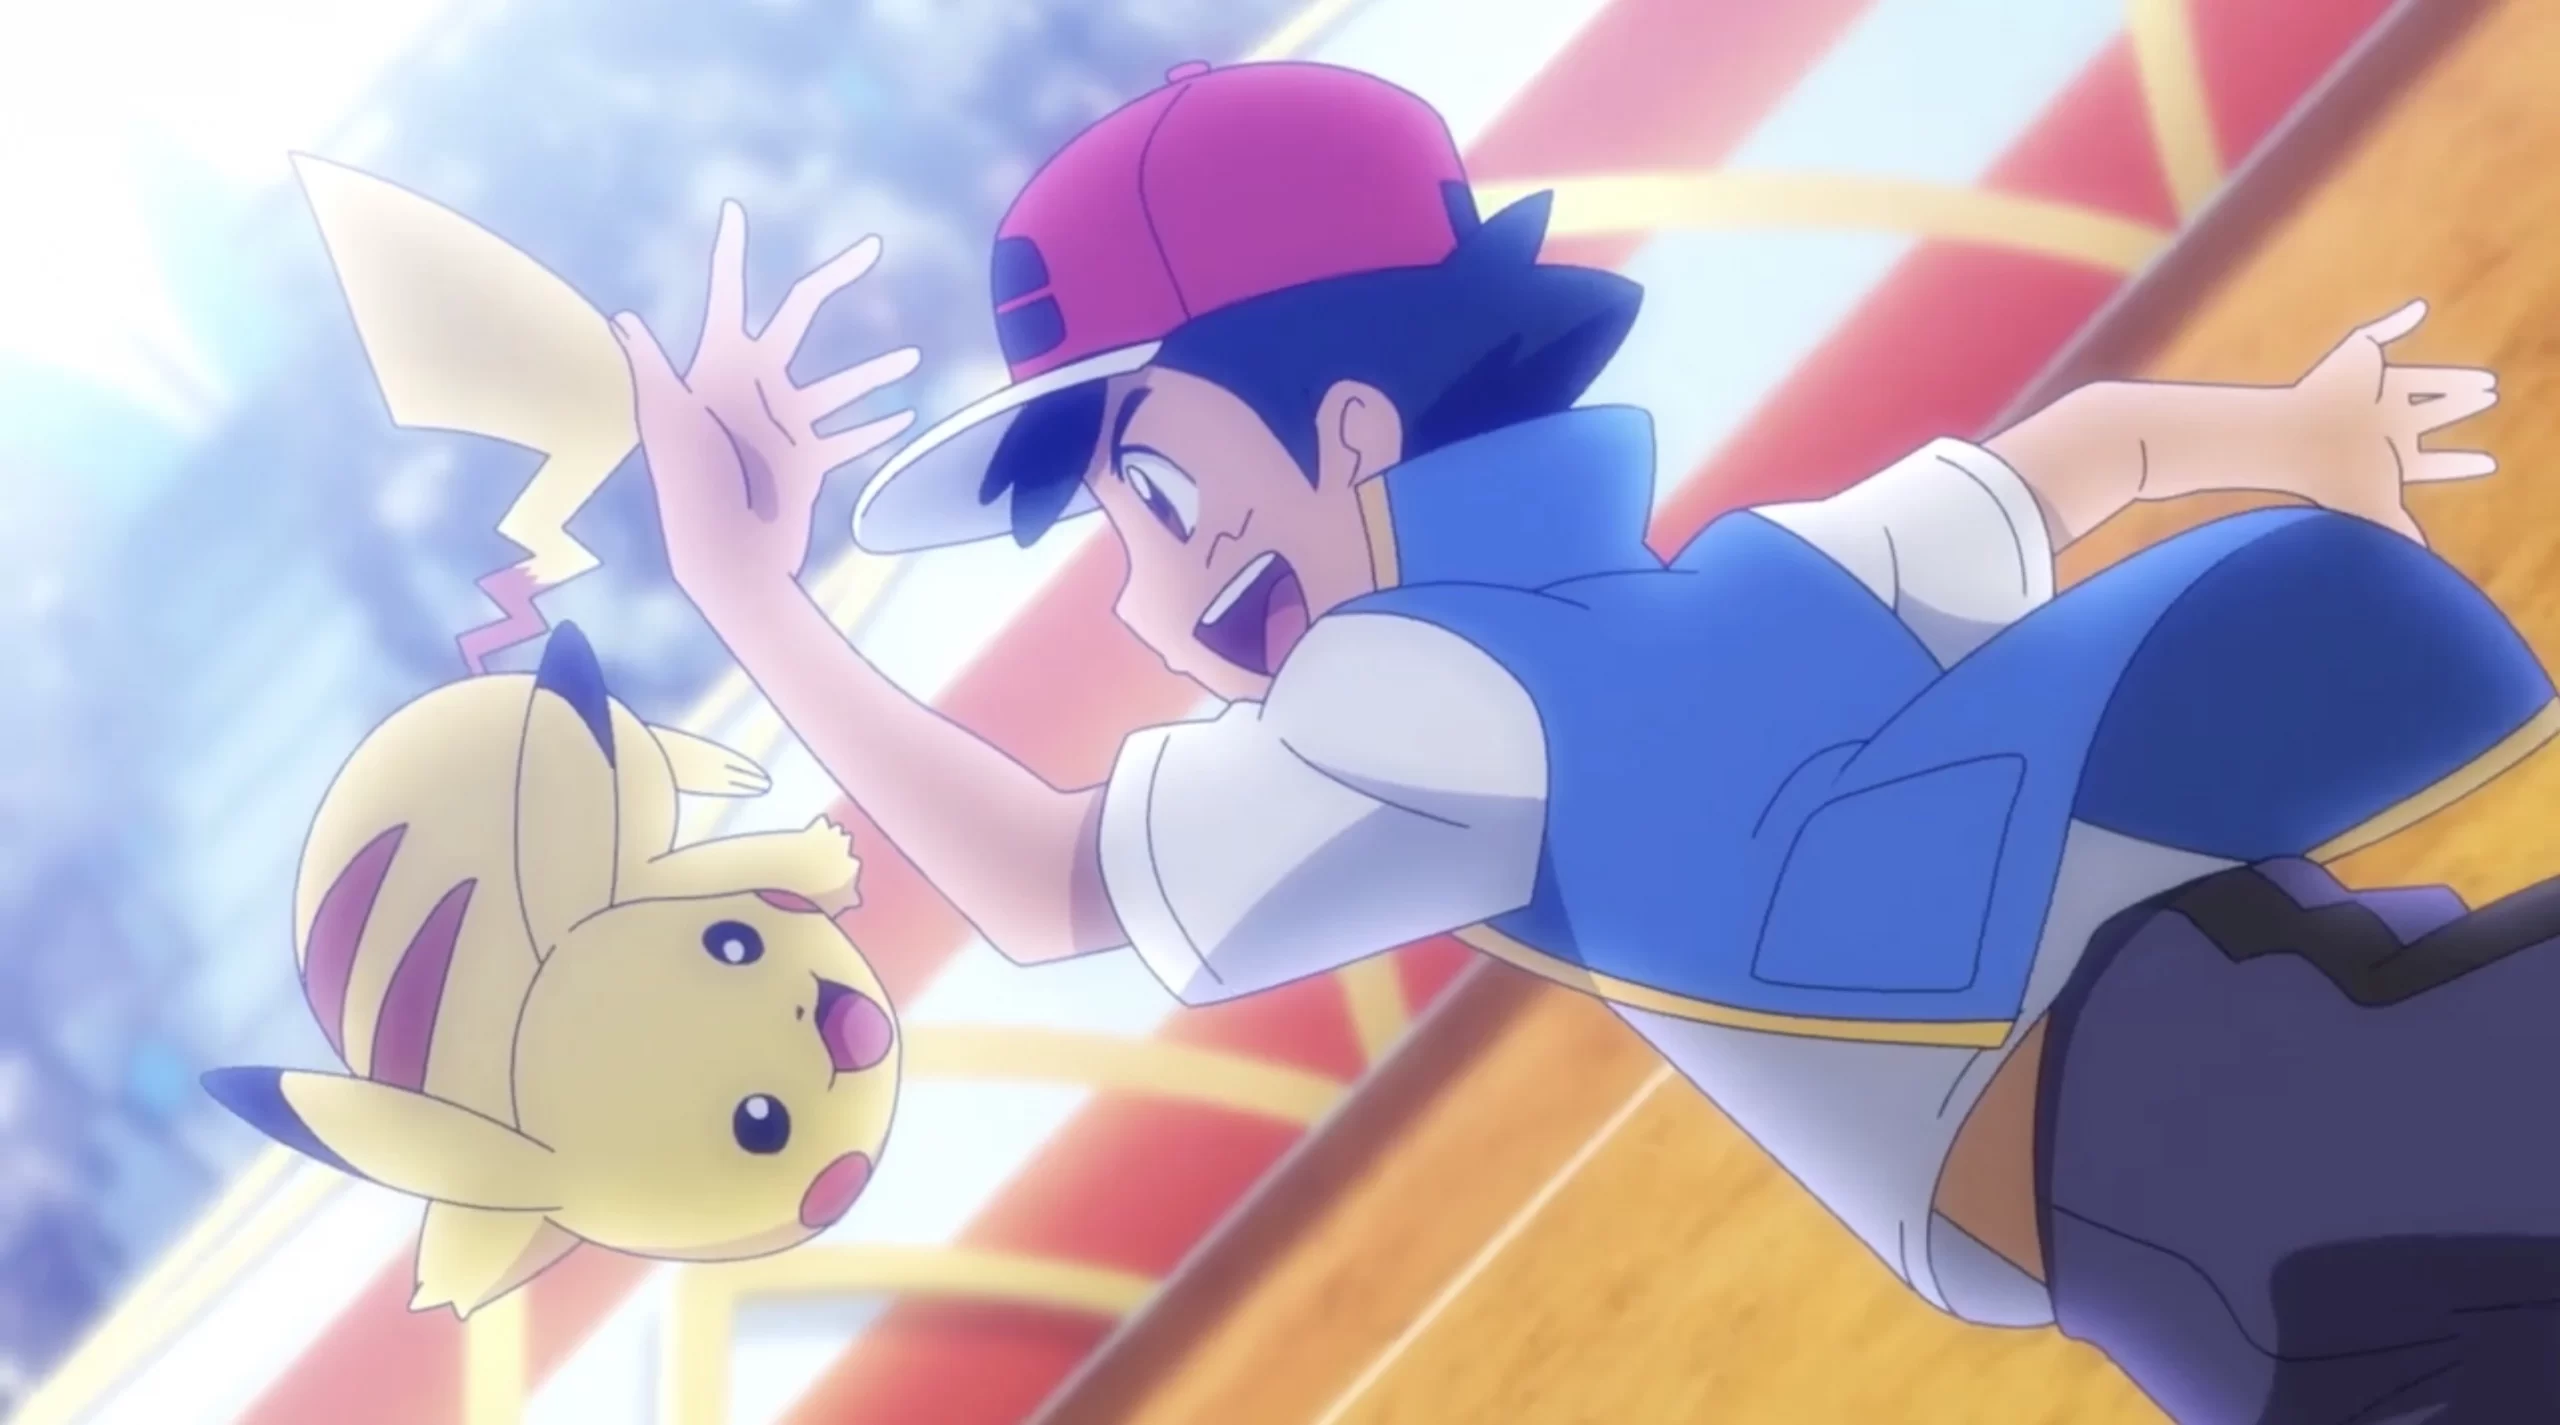 Pikachu and ash celebrating, how to play with your buddy in Pokemon Go guide header